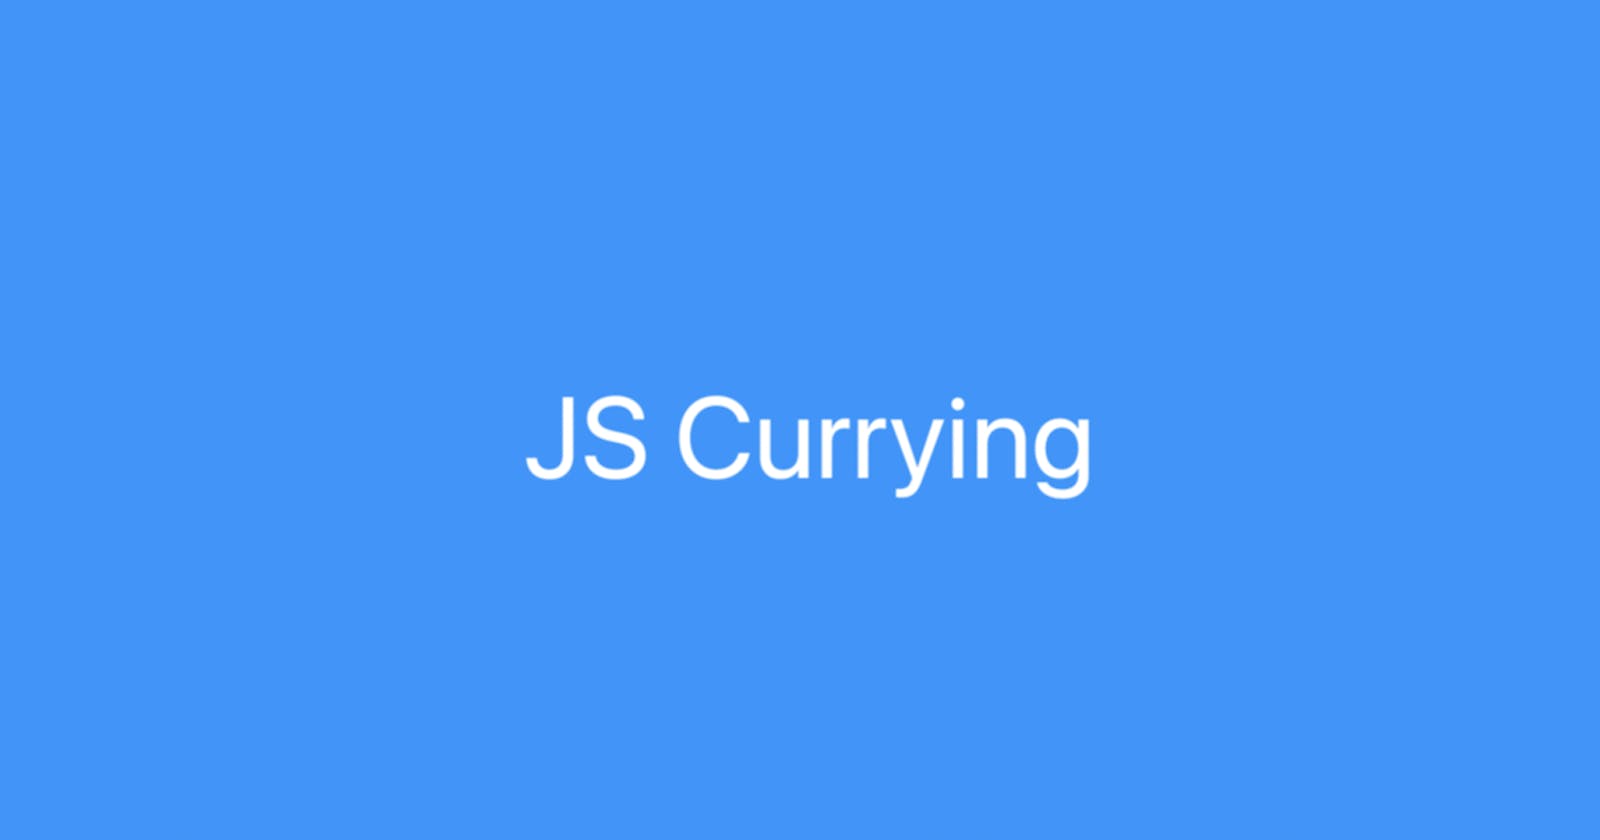 JS Currying